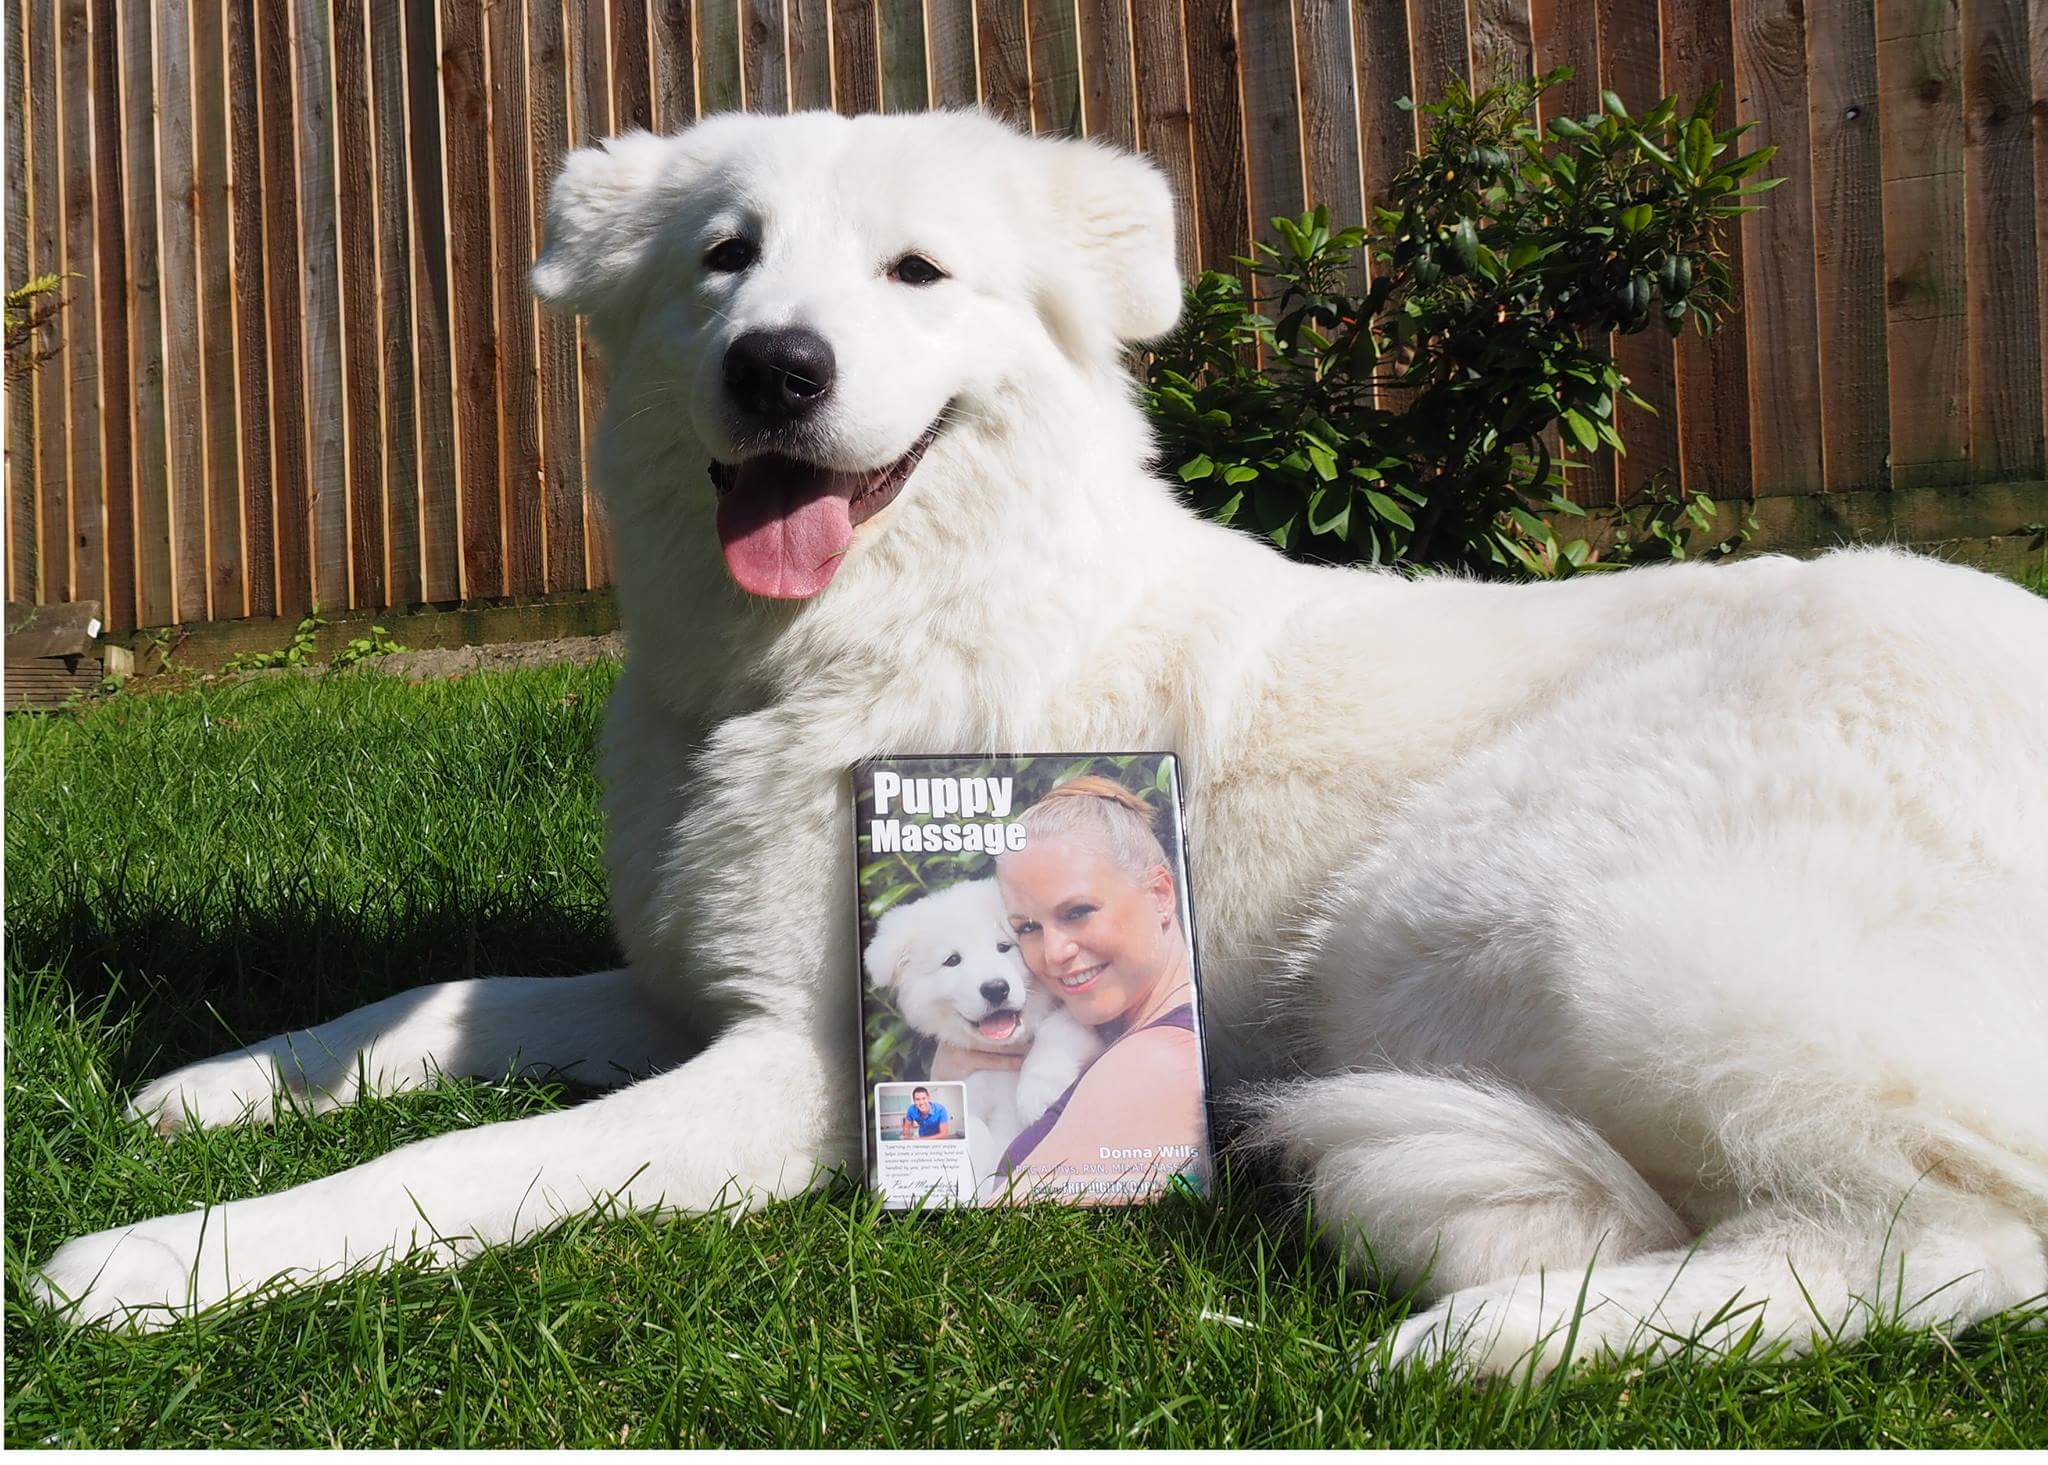 Immy the Puppy star with her own DVD!